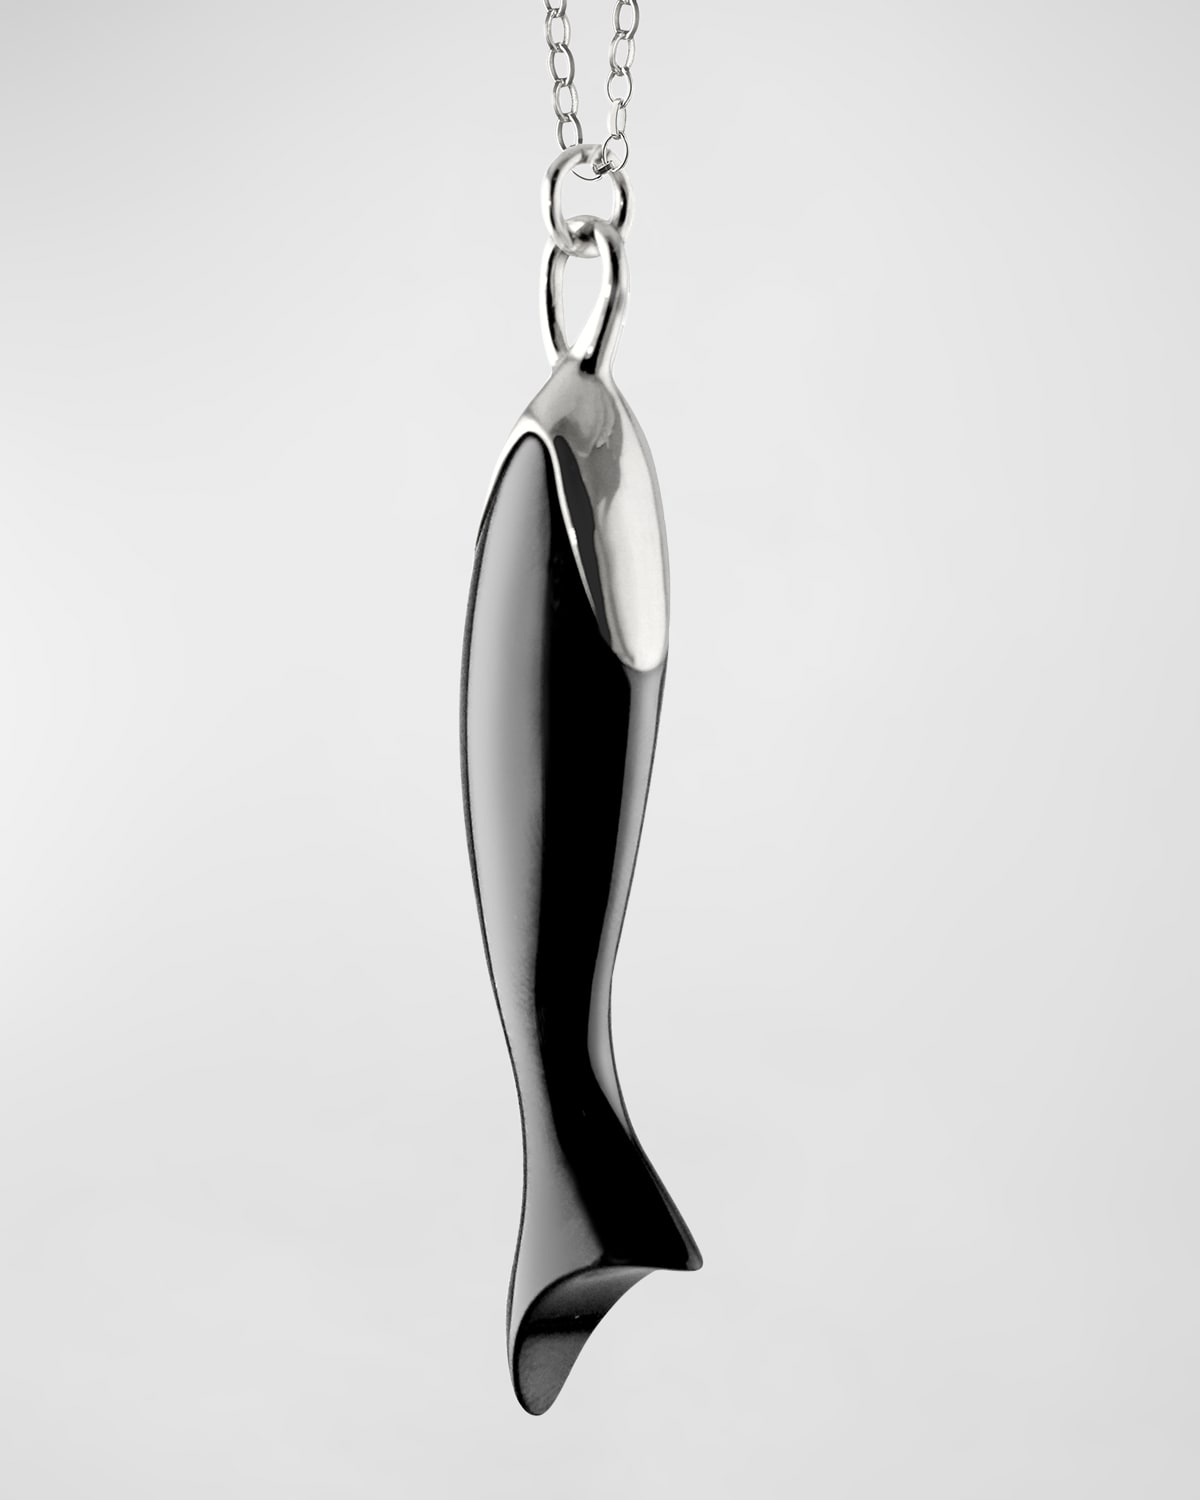 Sterling Silver and Ceramic Fish Charm on Small Belcher Chain, 30"L